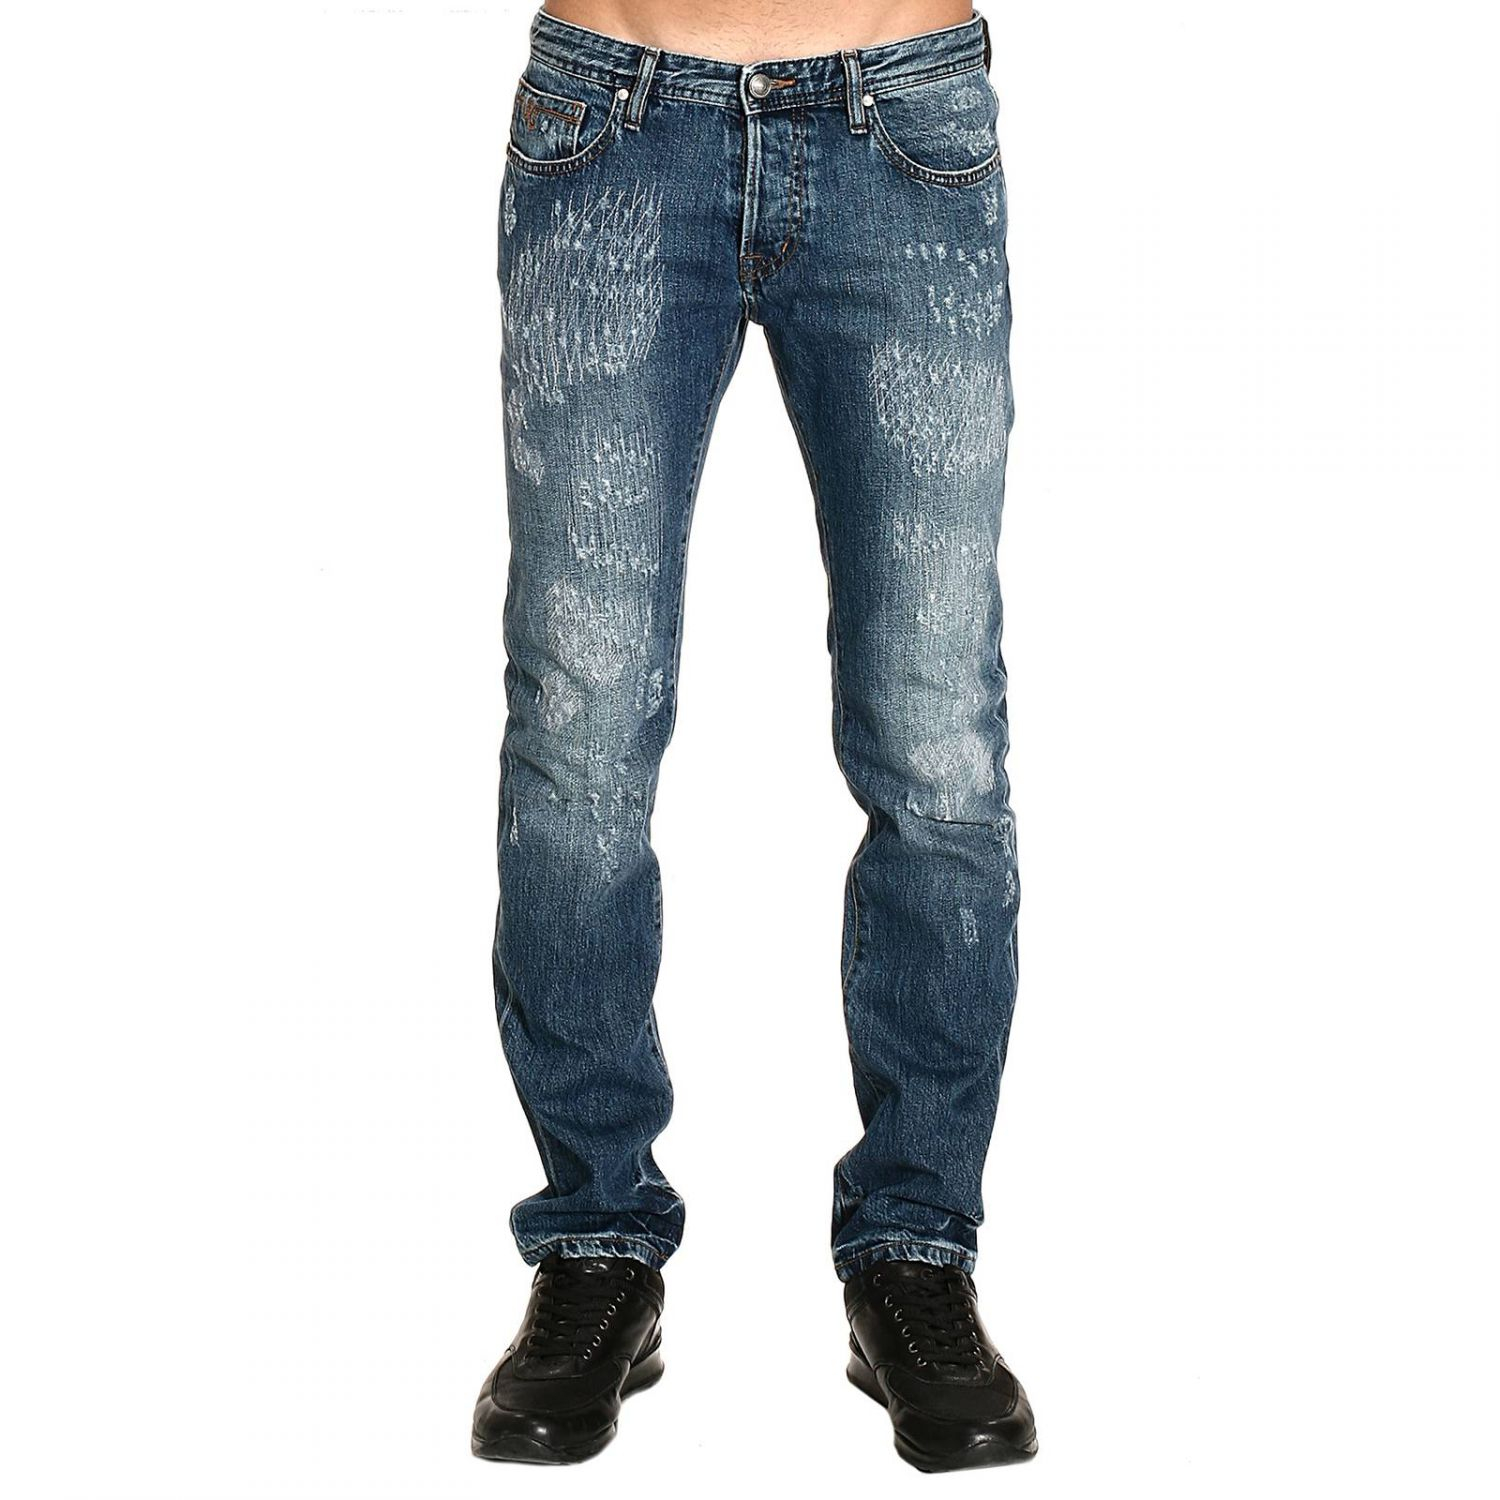 Lyst - Just Cavalli Stitiched-Detail Straight-Leg Jeans in Blue for Men